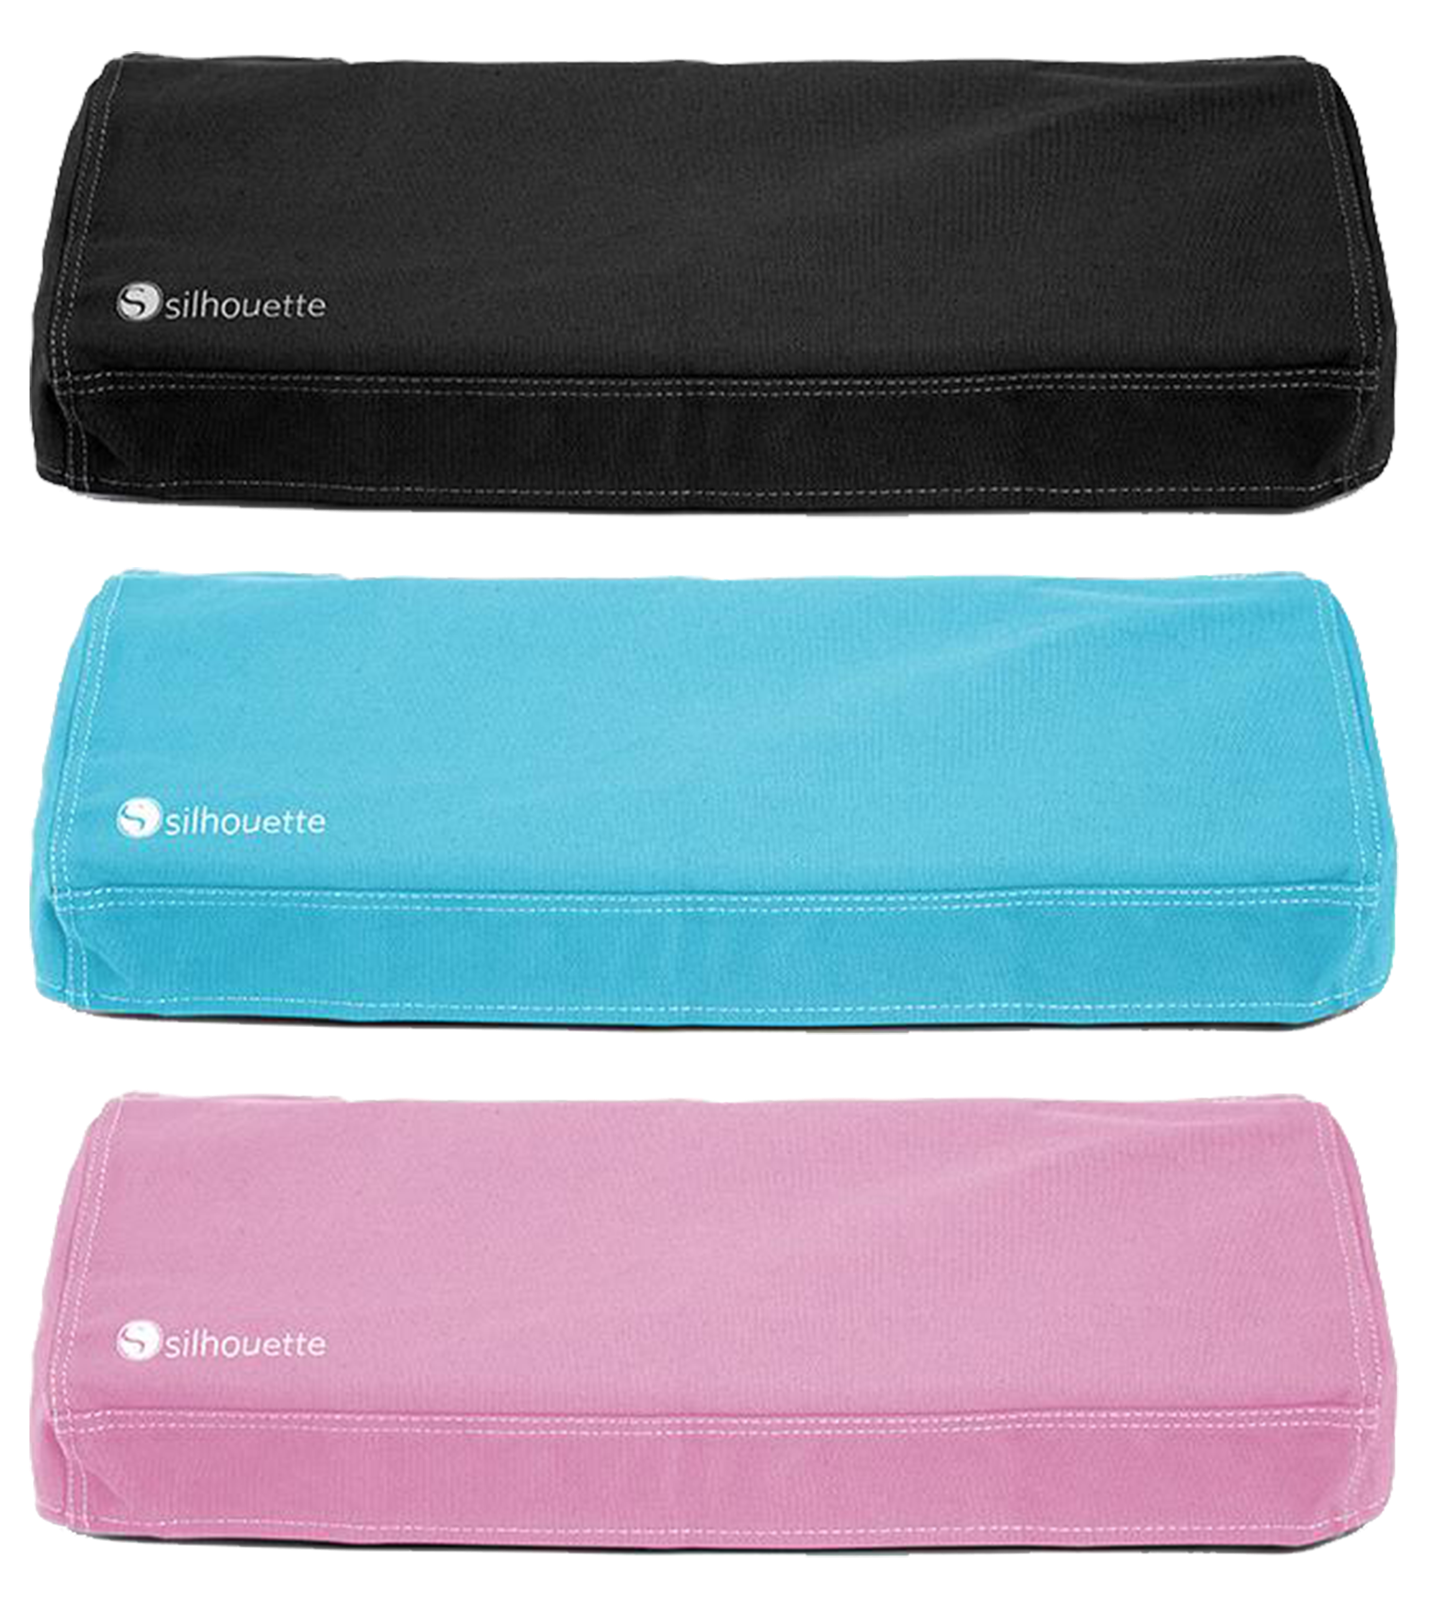 Silhouette Cameo 4 Dust Cover - Black Blue And Pink